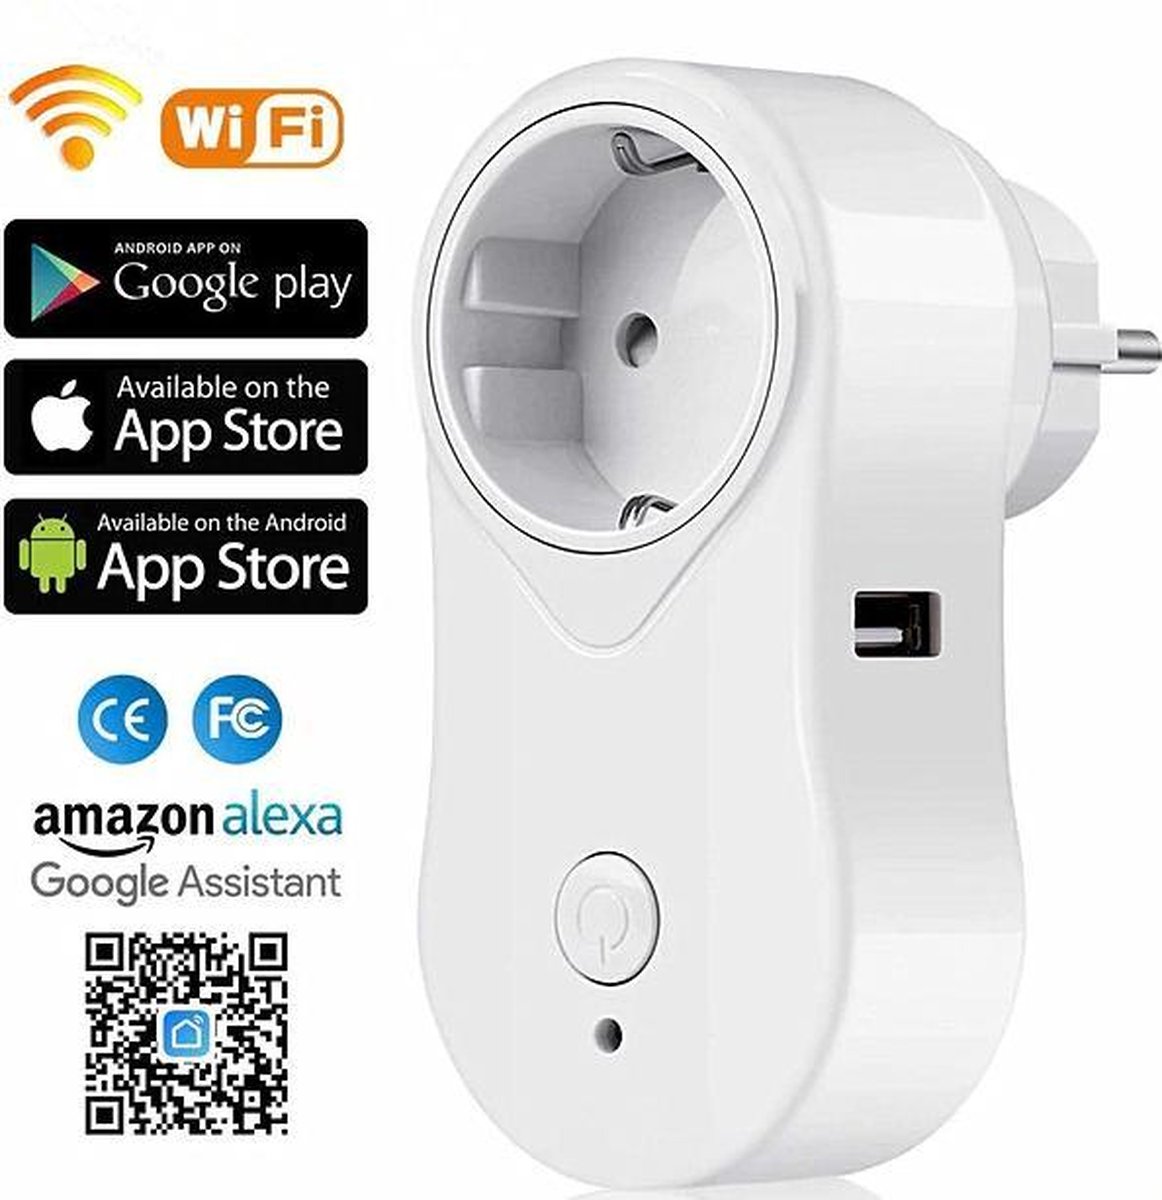 Smart Plug Wifi Socket 16A EU Outlet Wireless timing Smart Switch Remote Controlled Sockets Compatible with Amazon Alexa, Echo and Echo Dot for IOS and Android with Voice Control